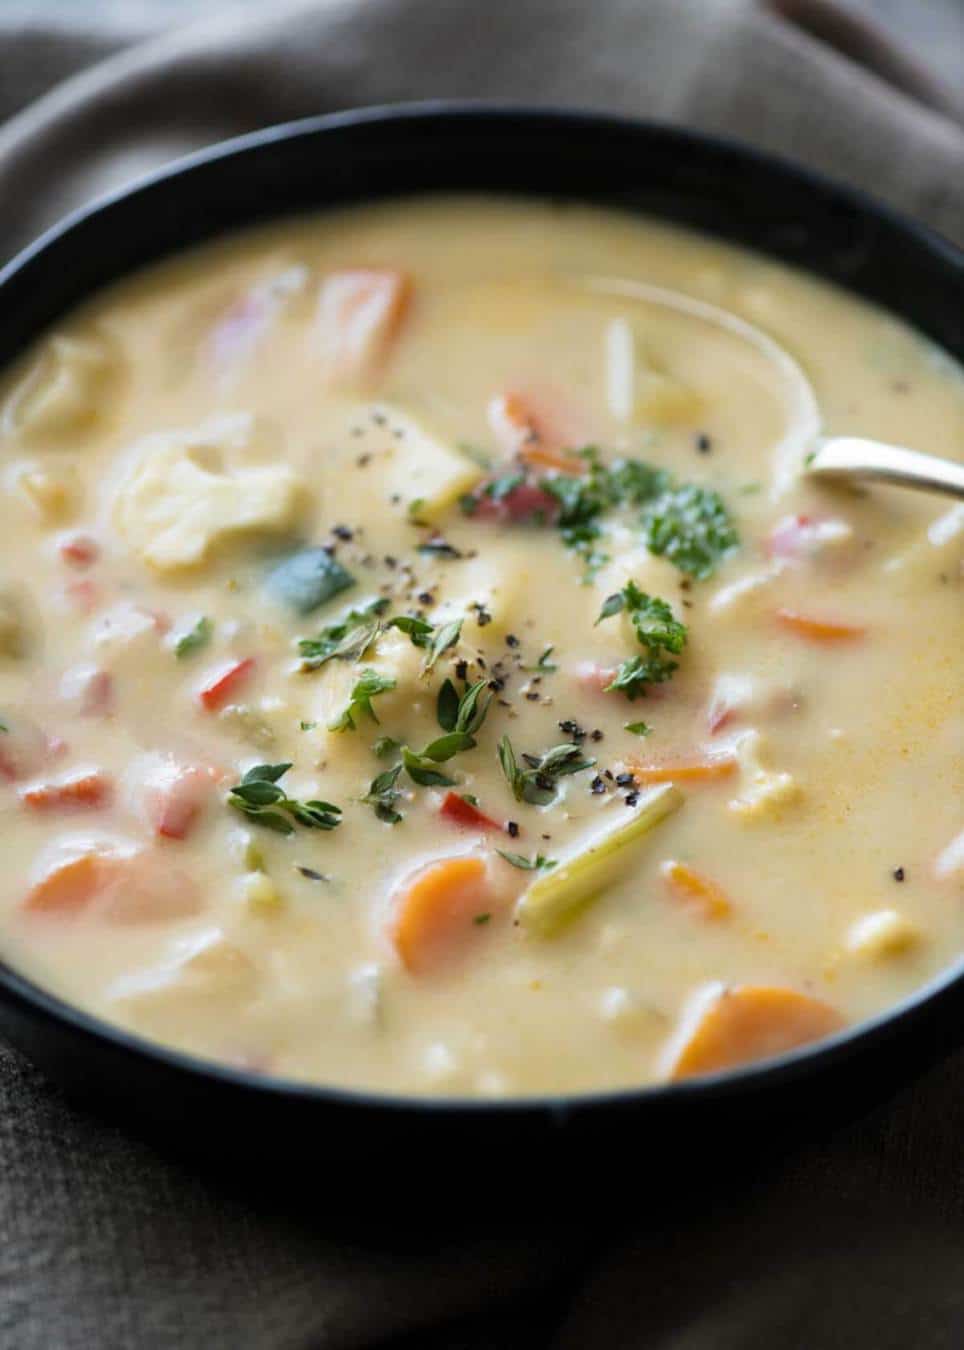 It's a miracle - this Creamy Healthy Vegetable Soup is super low cal, low carb, gluten free and unbelievably tasty. The secret: peeled zucchini, cauliflower, onion and garlic cooked then pureed. Imagine the possibilities! recipetineats.com